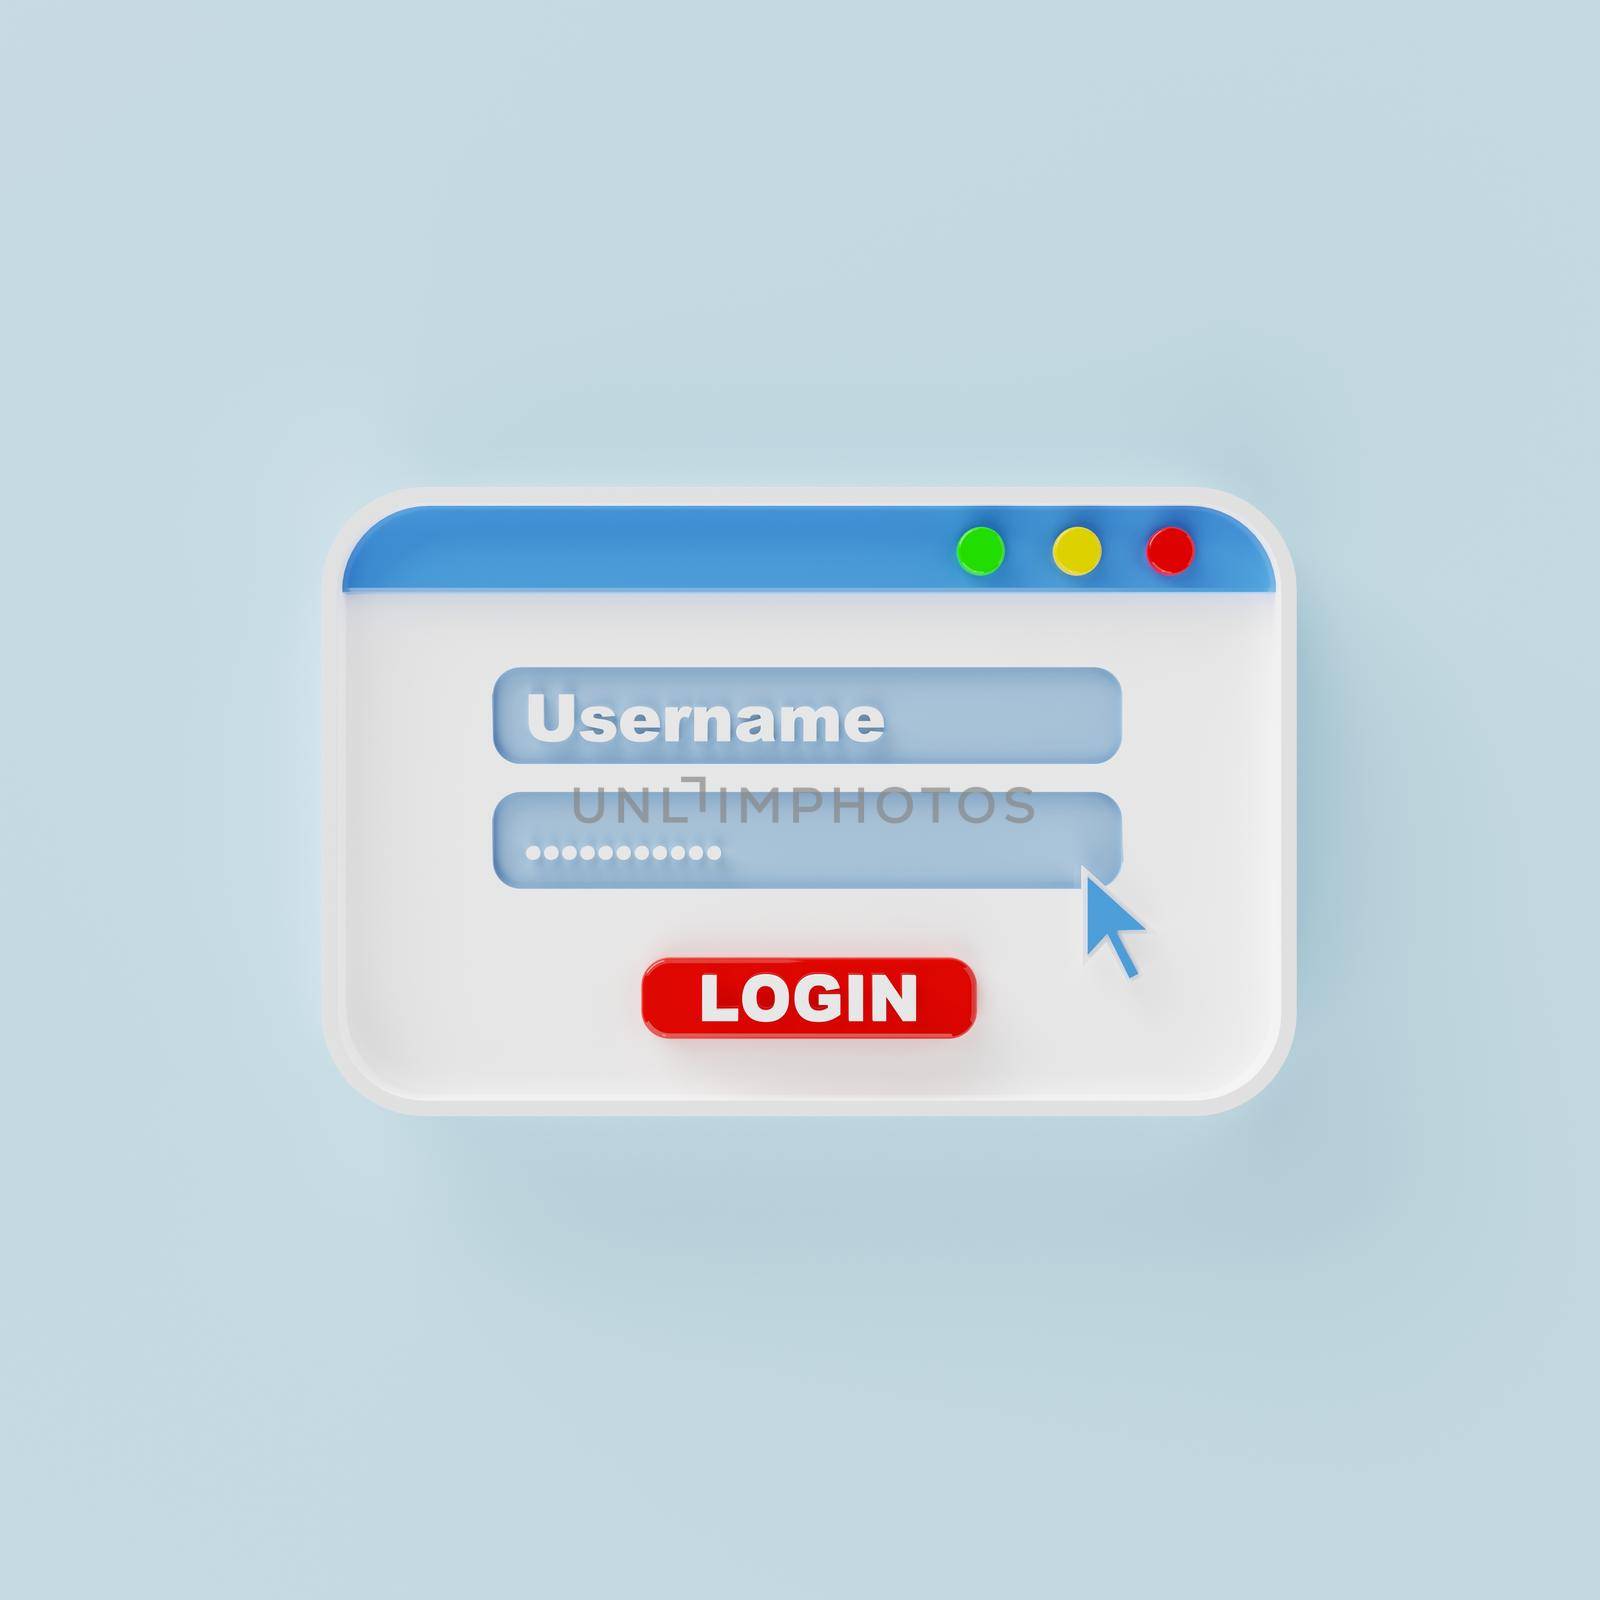 Login Username and password user interface pop-up window on blue background. Computer operating system internet browser and social network concept. 3D illustration rendering